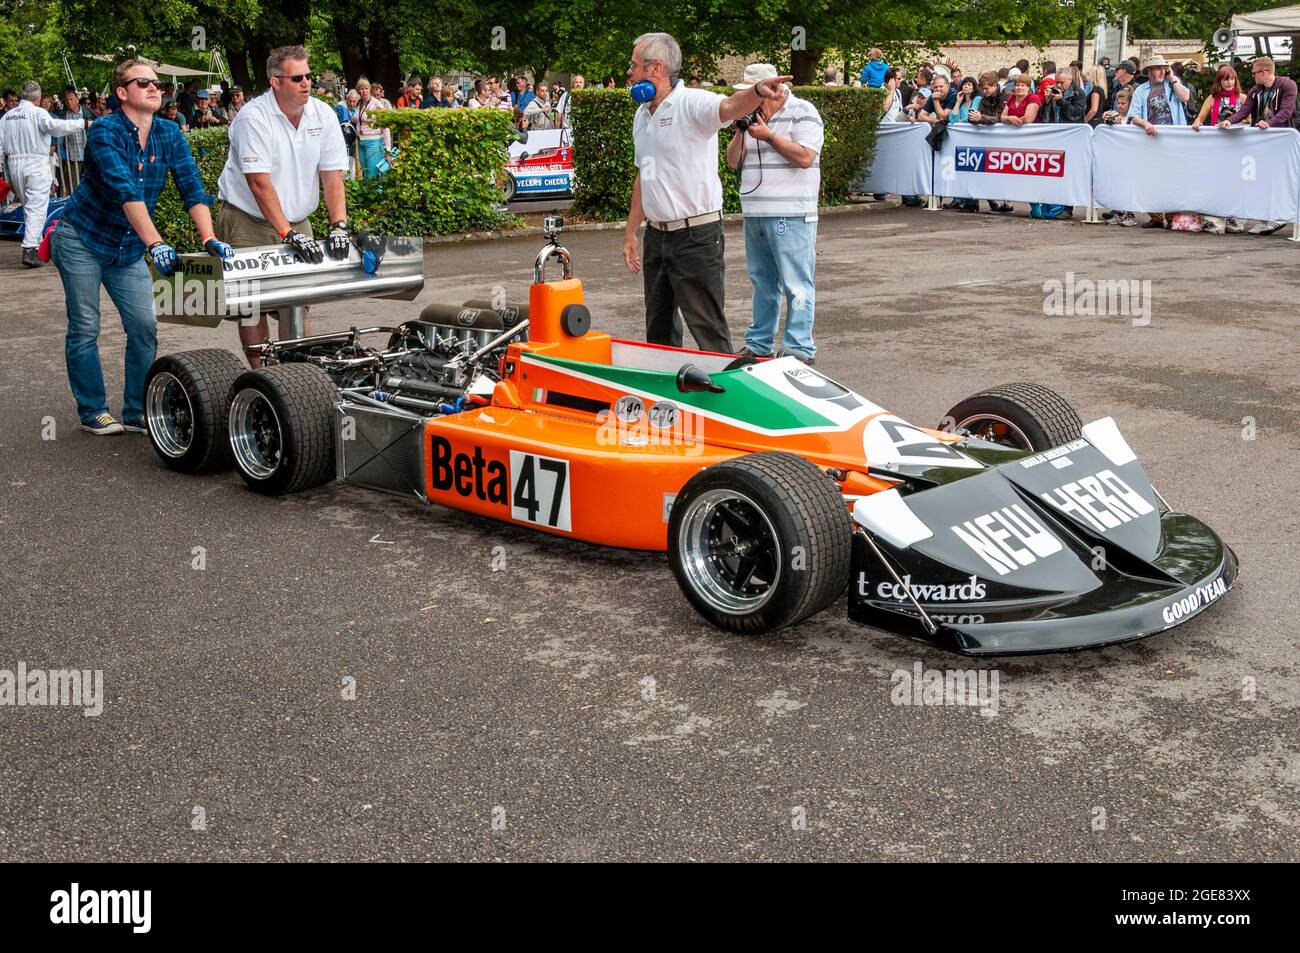 March 2-4-0 experimental six-wheeled Formula One racing car built by March Engineering at the Goodwood Festival of Speed motor racing event. Pushing Stock Photo